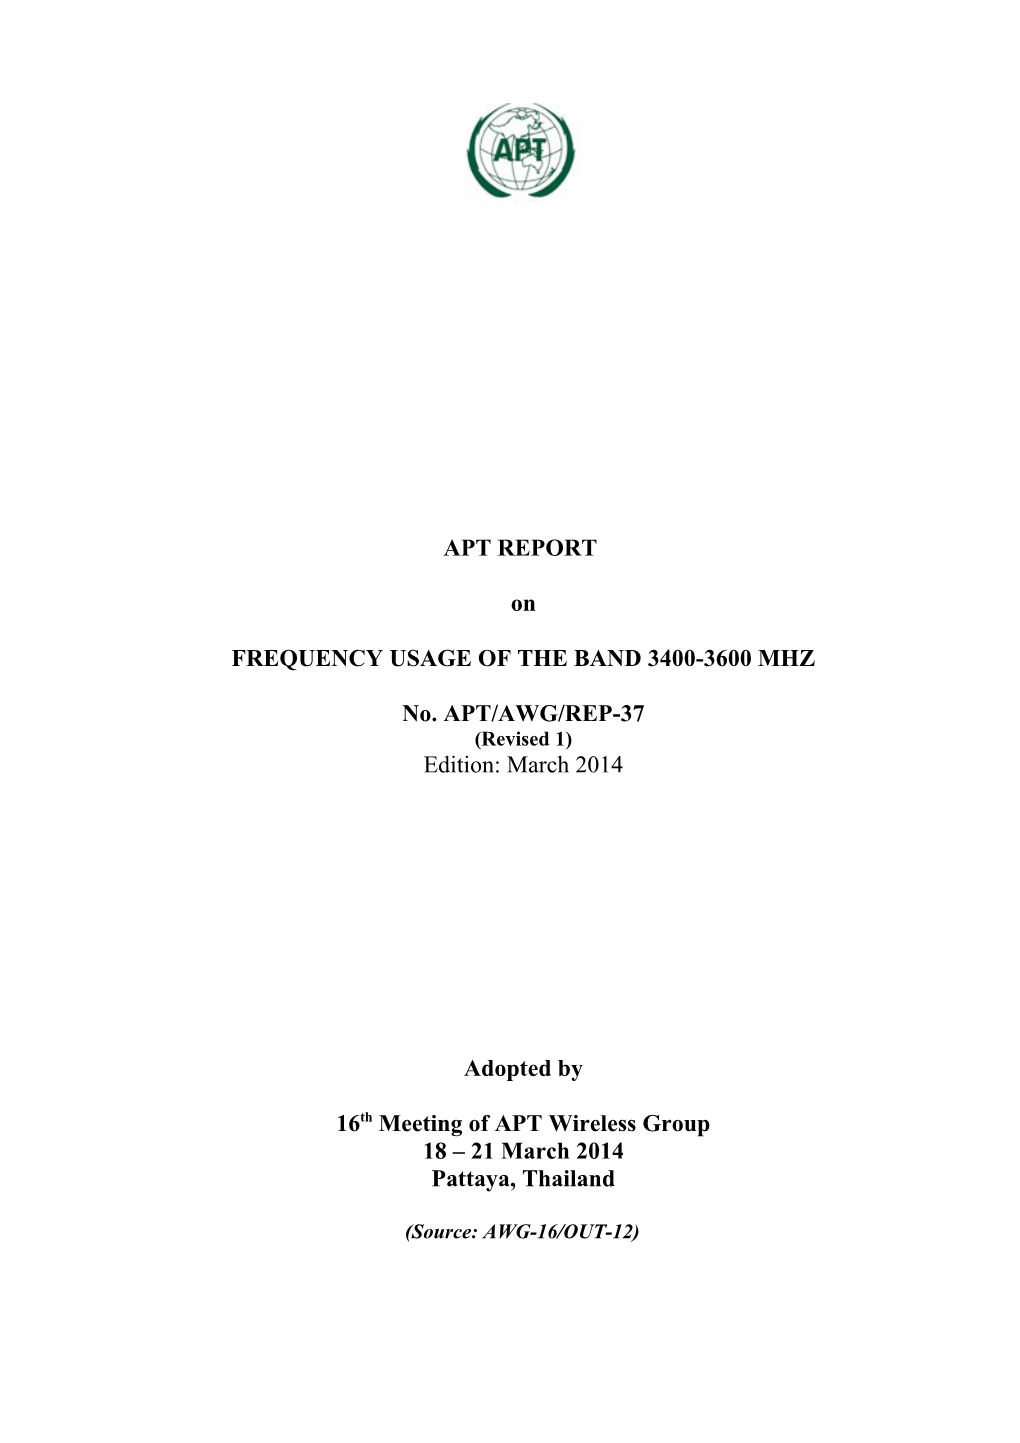 Draft Report on Frequency Usage of the Band 3400-3600 Mhz in APT